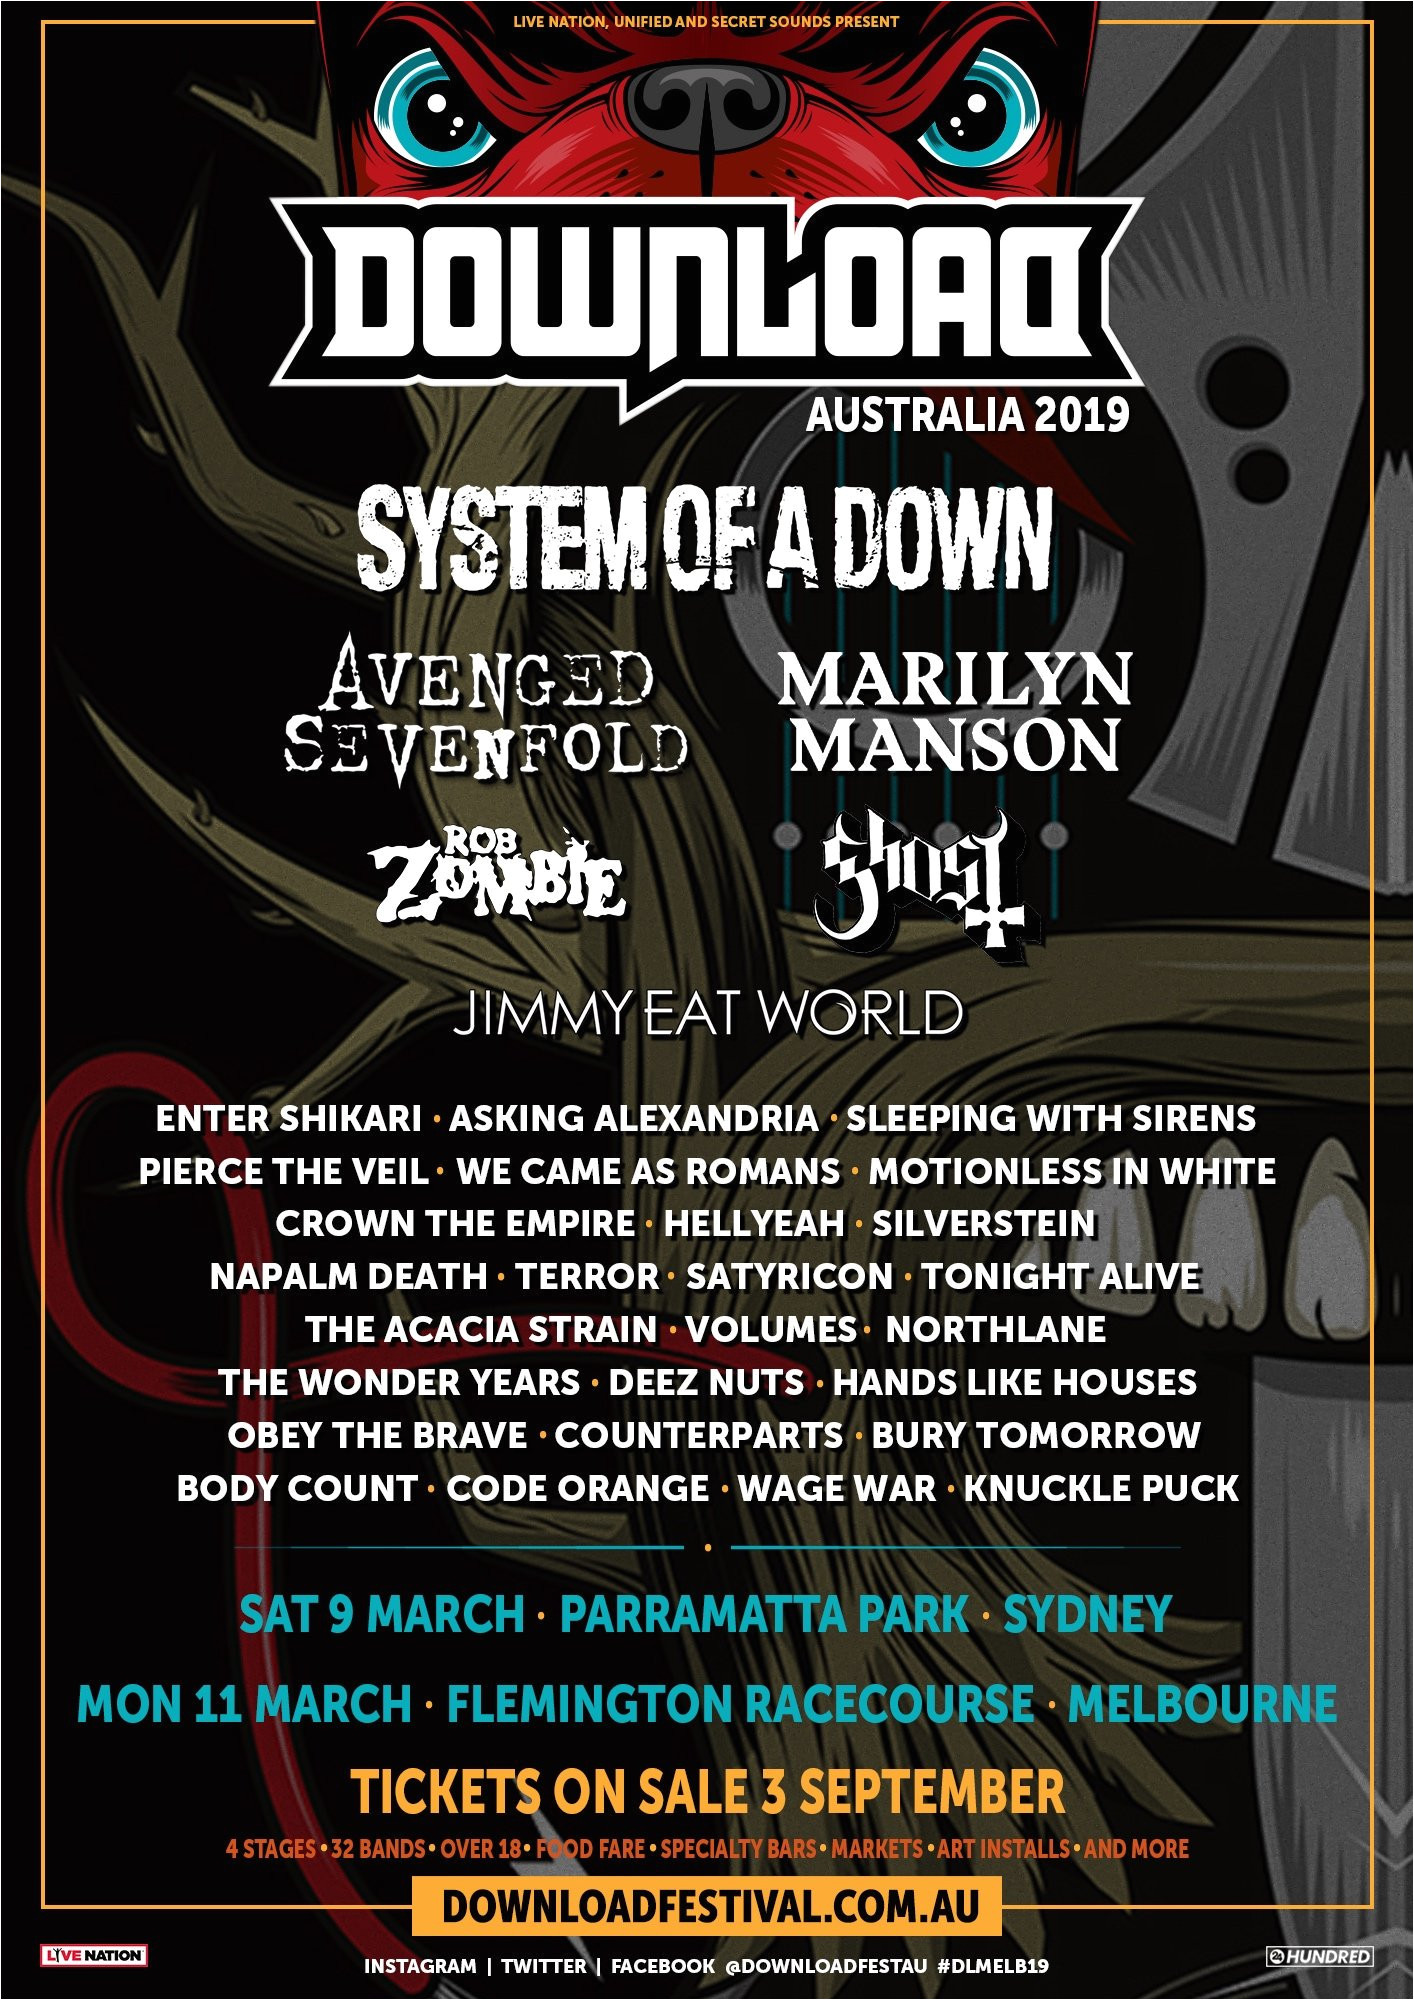 Pax 3 Black Friday Sale 2019 Yep that Download Festival Australia 2019 Lineup Poster is Fake ...